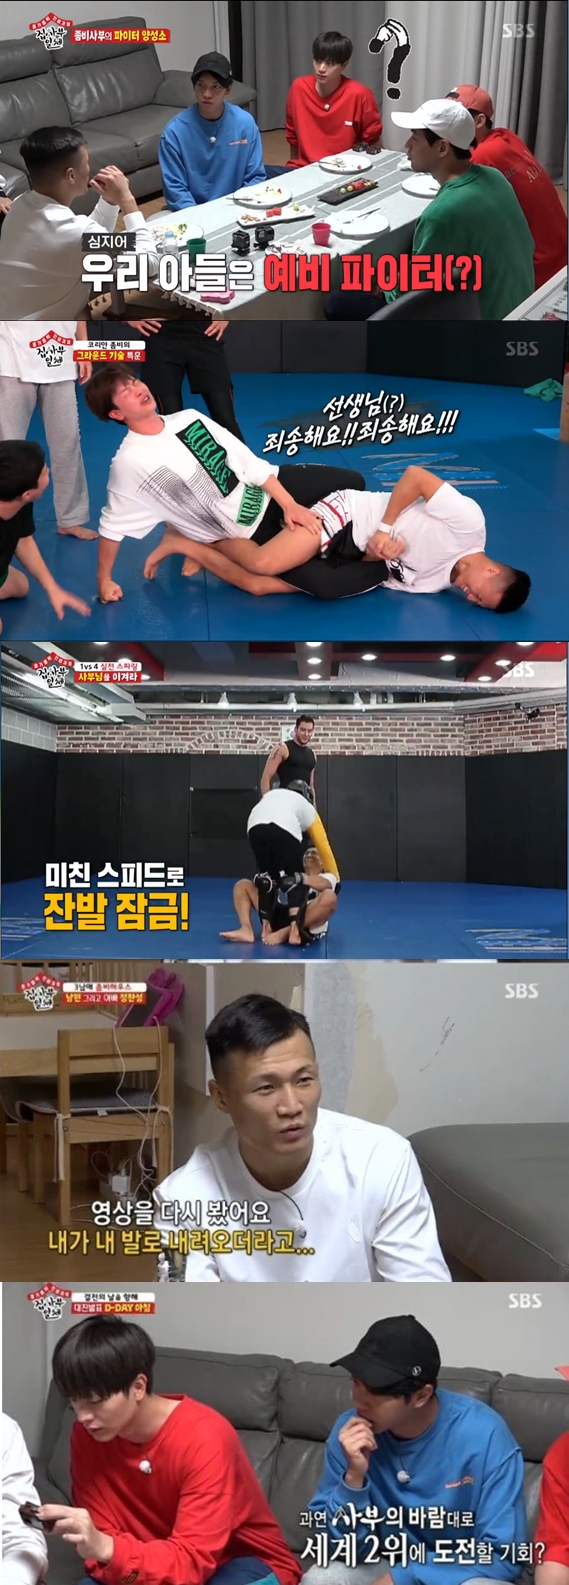 Chan Sung Jung has not hidden his love for FamilyIn the SBS entertainment program All The Butlers broadcasted on the night of the 13th, Korean zombie UFC player Chan Sung Jung came out as master and spent the day with the members.The members who had learned Chan Sung Jungs skills with all their might last week were already exhausted, but they learned one skill.Lee Sang-yoon said, Have you learned only one skill so far? Then the members learned the second practical skill.Chan Sung Jung is the only person who can use the technology of twister in the UFC, Julien River said.Chan Sung Jung said, If you actually put the technology on, your ankle breaks. But what you do now is a Thai massage. However, the first experience, the upbringing material, I am sorry for you, laughed and laughed.Chan Sung Jung said, Lear Naked Choke is a technology that can win a lion. He introduced a new technology, saying, Man is the only way to win a lion.Chan Sung Jung said, I am an engineer and Two Sisters In Law is a woman, but I told Two Sisters In Law to try choke, but I fainted.After training and having dinner, the members heard about the preparation of Kyonggi to Chan Sung Jung.Lee Seung-gi asked, Who among the four seems to have the best motor nerves? Chan Sung Jung replied, Mr. Se-hyung seems to be unique.In response to Chan Sung Jung, Lee Seung-gi was shocked that he was unique and unique and unique.Chan Sung Jung said he should start the weight management soon after the match, saying, I can lose 7kg in three weeks from now. Some people are pushing their heads because of 100kg of water.Lee Seung-gi asked, When is the most trembling moment before climbing on the ring? Chan Sung Jung said, It seems like the best time to walk from the waiting room.Chan Sung Jung, who was enjoying a dinner, came to his juniors; they bought Chan Sung Jungs favorite chocolate cake, which enjoyed the last dinner before weight management.Lee Seung-gi asked a junior, Have you ever wanted to hit Chan Sung Jung?One junior laughed, saying, I always want to hit you, but if you try it, you will lose anyway.I lived in the gym when I started my first exercise, but now I live there because I have a house, said Hong Joon-young, a junior, who said, It is a tree that gives me a lot of strength and generousness when I exercise.Lee Seung-gi asked Hong Joon-young, Is there a crack in the ribs and is not stressed? Hong Jun-young said, There are not many cases where I go to a match in 100 professional condition.I think the injury is a bear, and I think the pros are sick every time I play. I have to take note and I want to win, Hong said. Chan Sung Jung, who listened to the conversation next to him, laughed, I taught you well.Chan Sung Jung pointed to Hong Joon-young and praised him as the best friend who exercises except me in this gym.Chan Sung Jung told the members about how much he tried to eat.He said, I have measured my muscular endurance by measuring my physical ability, and most of them showed my champion mental strength without giving up in the section where the athlete gives up. He said that he overcame it with my strength and mental strength because of lack of natural physical condition.The next day, Chan Sung Jungs match was decided; the opponent was Ortega, second in the World Rankings.Its the opponent Ive been wanting to keep, and it gives me goose bumps, Chan Sung Jung said, when Chan Sung Jungs two daughters approached.When I saw my two daughters, ages six and three, Chan Sung Jungs expression brightened, and the daughters smiled brightly as they cited Lee Seung-gi as the most handsome of the rising figures.He showed Father Chan Sung Jungs appearance, saying that it is child care that is harder among child care and exercise.Chan Sung Jungs wife tried to hide her worries about him, joking that she was good to make money because Kyonggi was caught, but also hinted at the fear of an injury she might not know.Ive had an eye fracture once, my daughter couldnt speak because Father was bleeding, and the children know it, he said.I had seen it in front of my eyes that I had fainted from an injury, so I was worried that I had trauma to my injuries.Chan Sung Jung said, I said and signed the Fight Money document after Kyonggi, but I do not have any memory at that time.Now Im doing Kyonggi to protect my Family. I lost my memory and she said she was okay and hugged her crying wife.I loved my wife so much that I did it, she said.